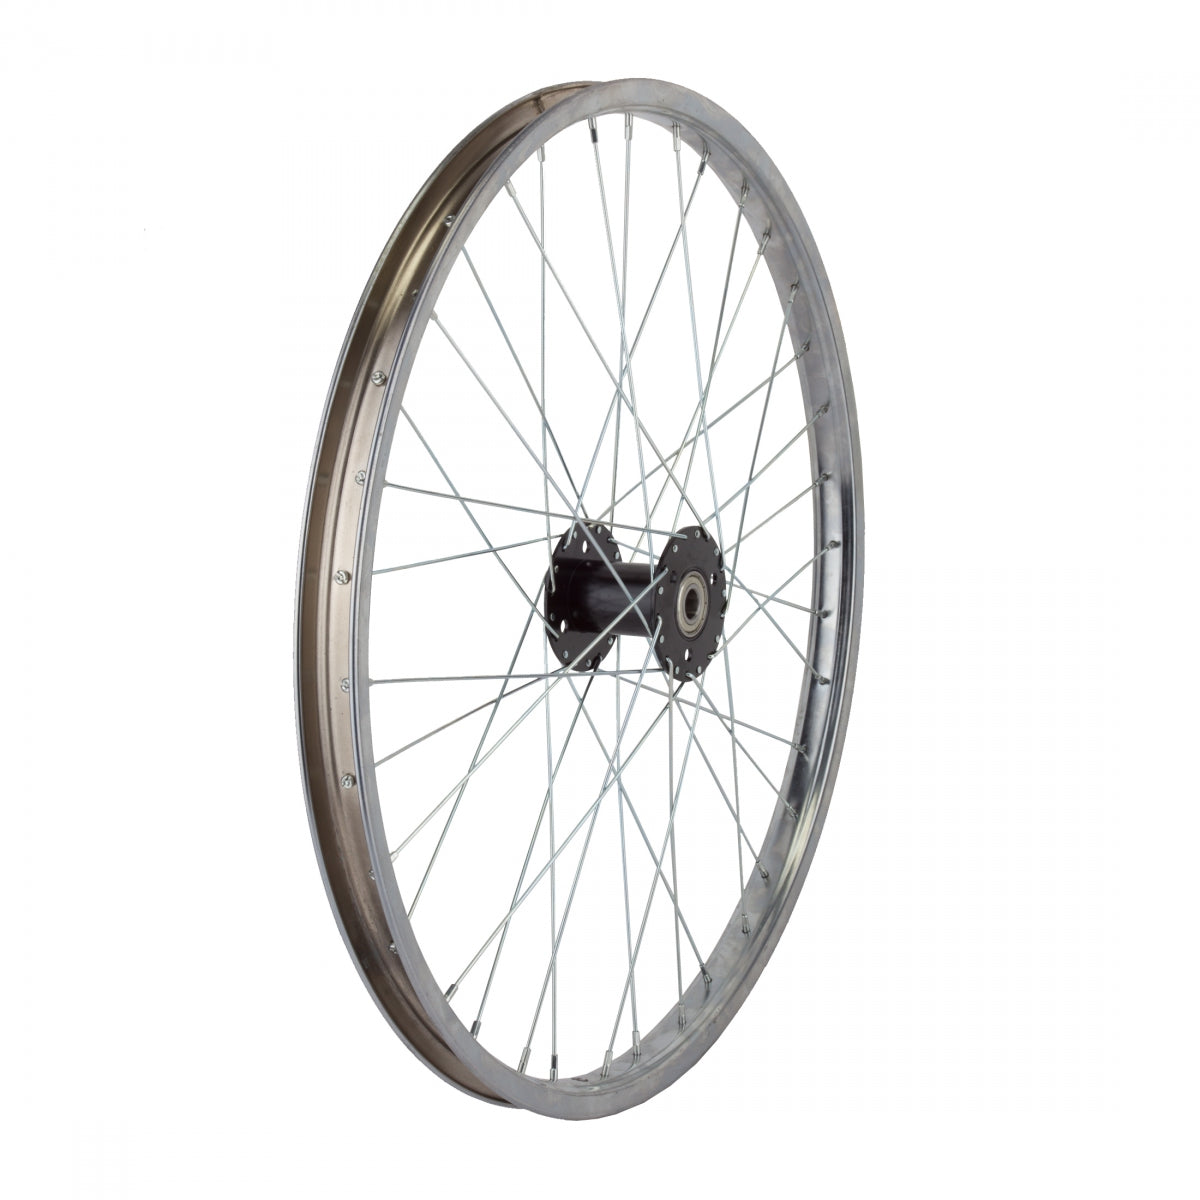 Wheel Master Rear Bicycle Wheel for Trike, 24 x 1.75 36H, Steel, Bolt On, Silver